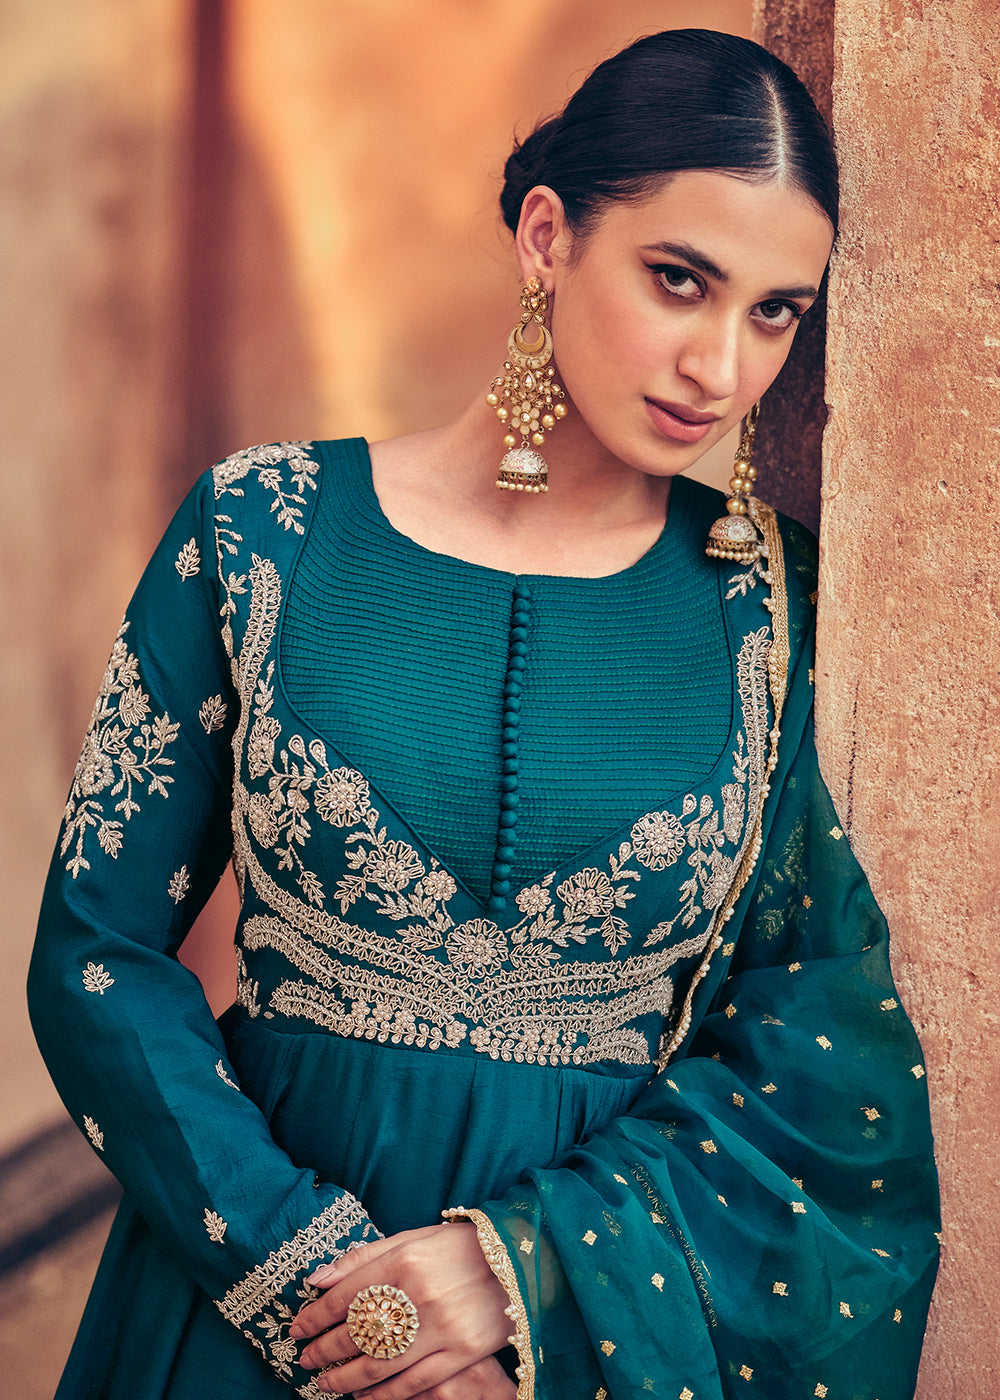 Buy Now Festive Style Teal Blue Embroidered Silk Anarkali Suit Online in USA, UK, Australia, New Zealand, Canada & Worldwide at Empress Clothing.